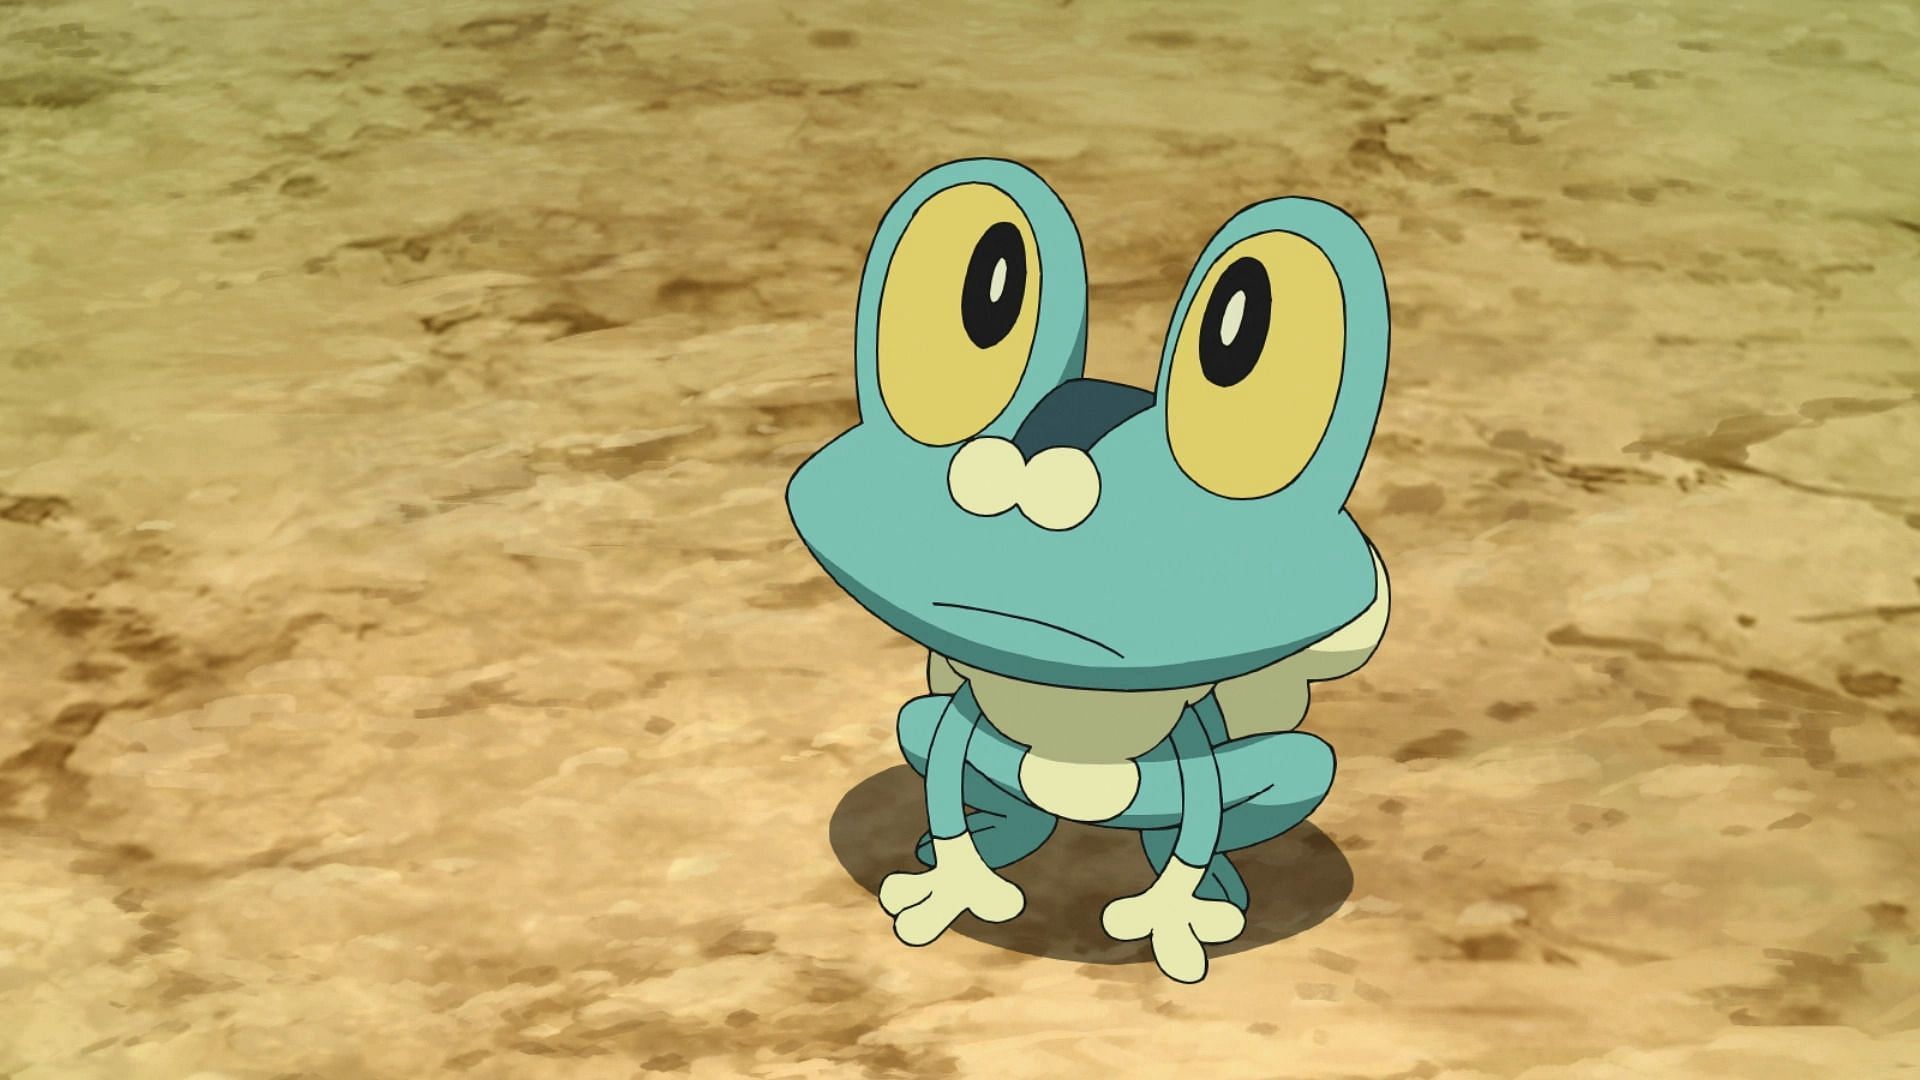 Froakie as it appears in the anime (Image via The Pokemon Company)